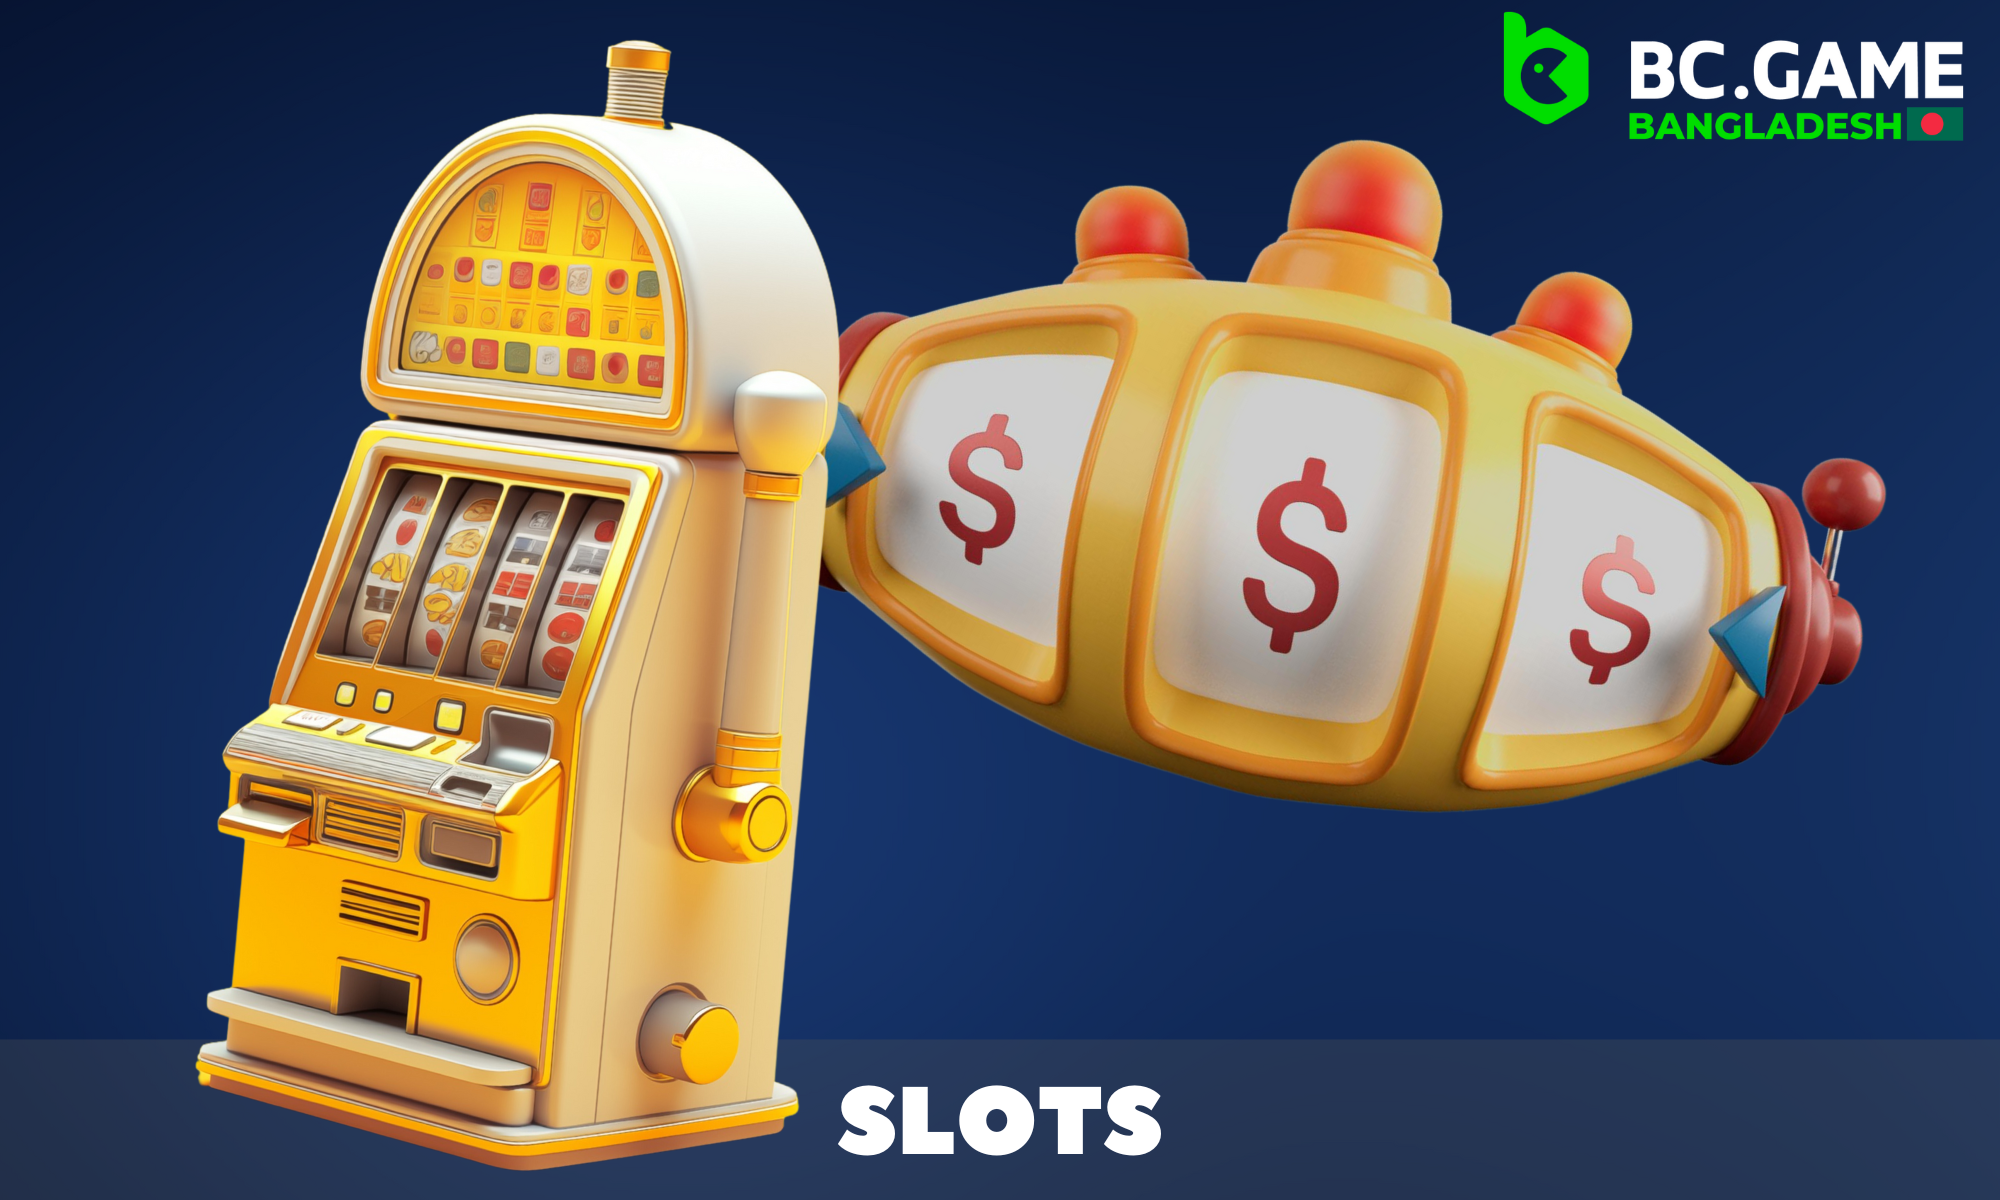 The Slots category at BC Game offers 800 games from popular developers of high-quality gaming software